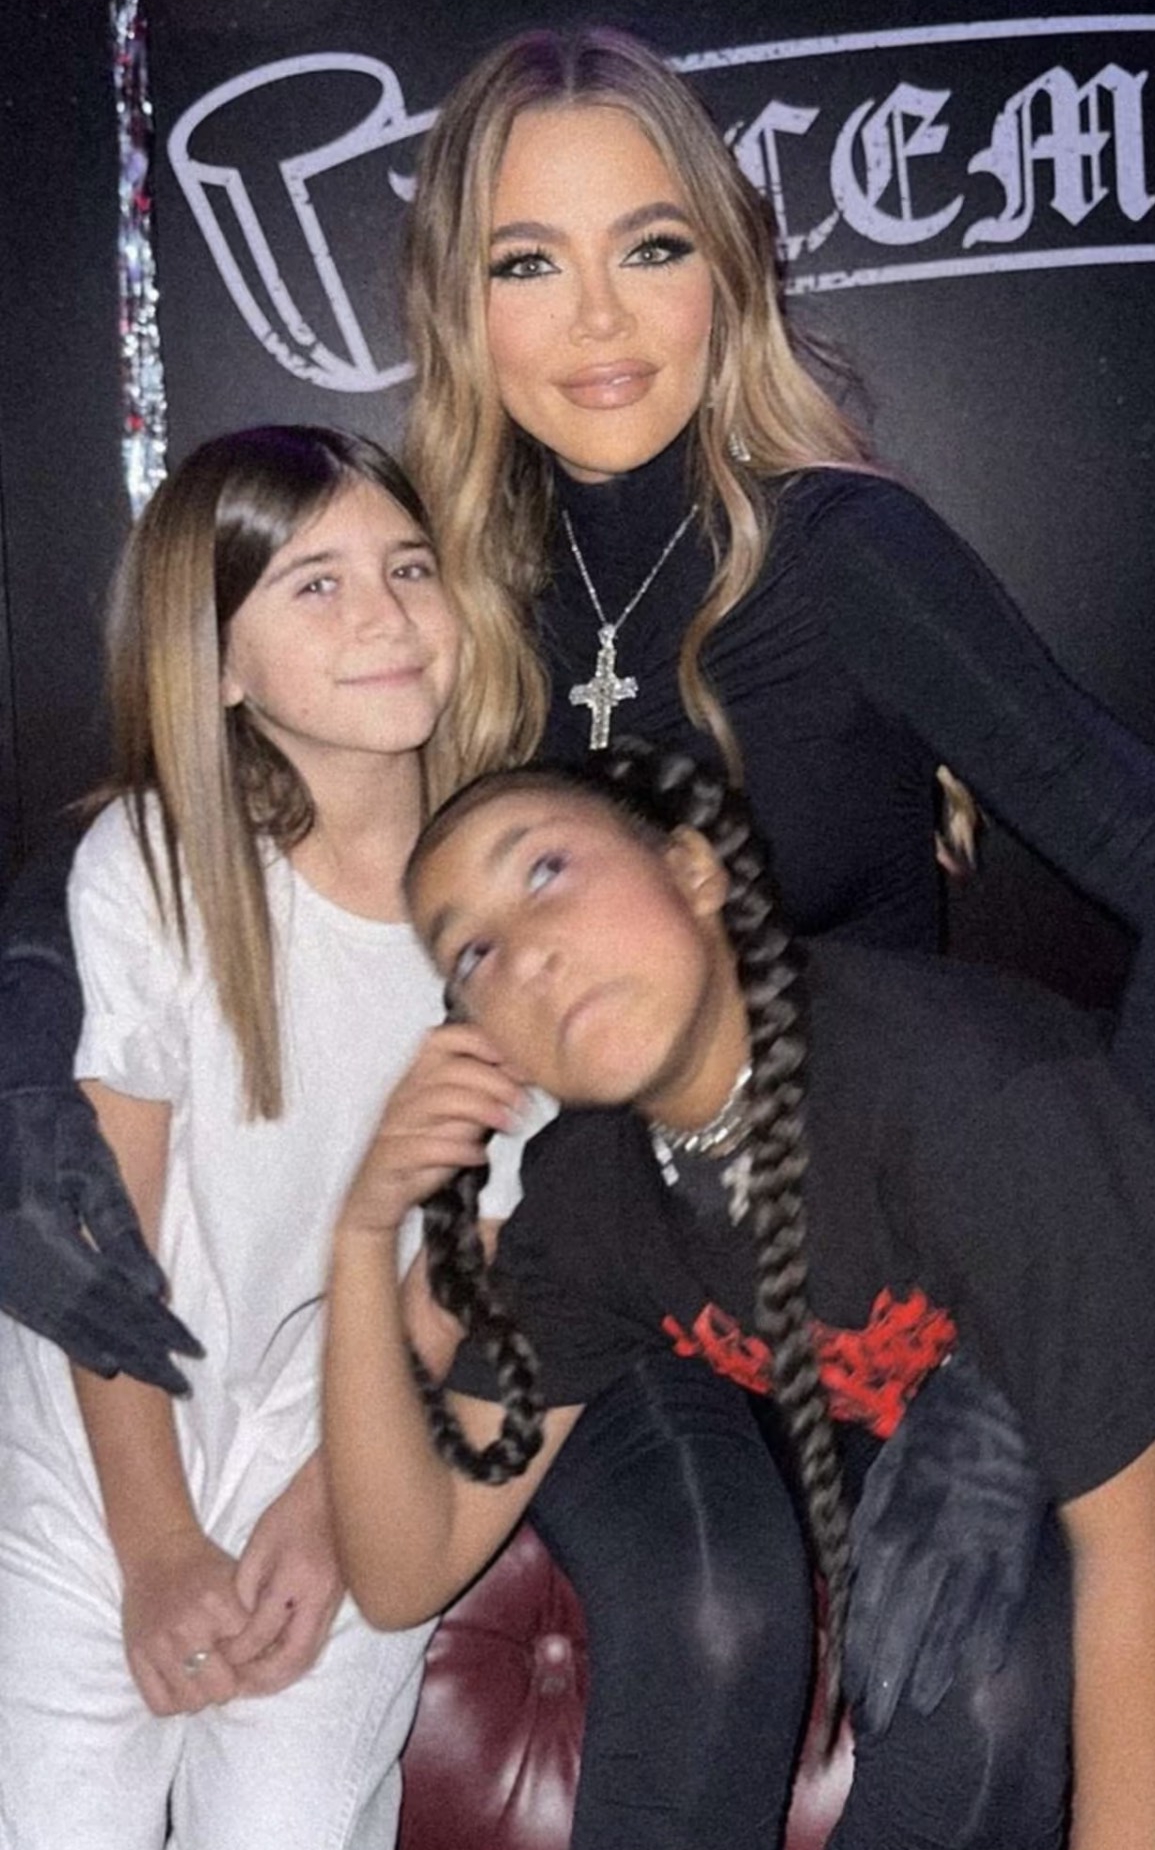 North West, 9, crashes aunt Khloe Kardashian and cousin Penelope’s sweet new photo as family makes wild faces